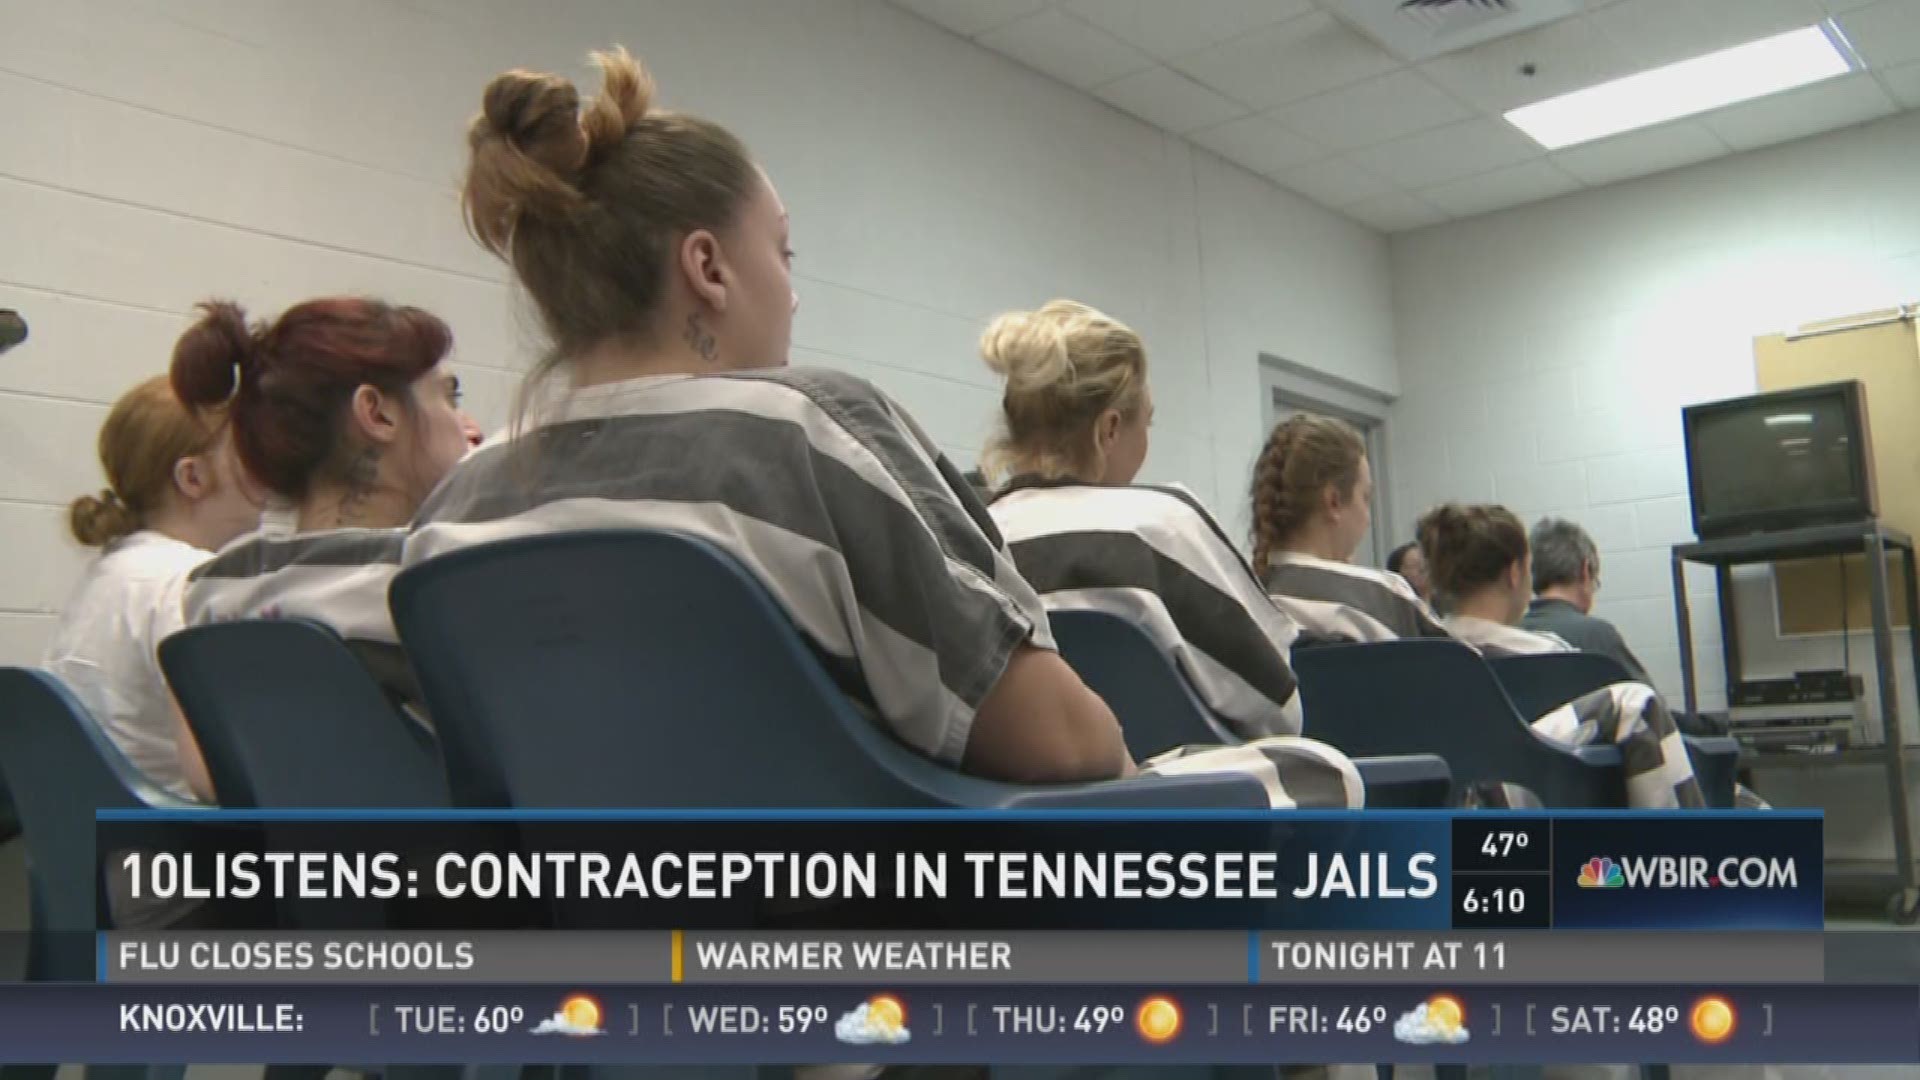 Jan. 30, 2017: An estimated 90 percent of the women in Tennessee jails are serving time because of drugs. An expanded health department initiative is offering long term birth control options to women in jail to help reduce the problem of drug-dependent ba